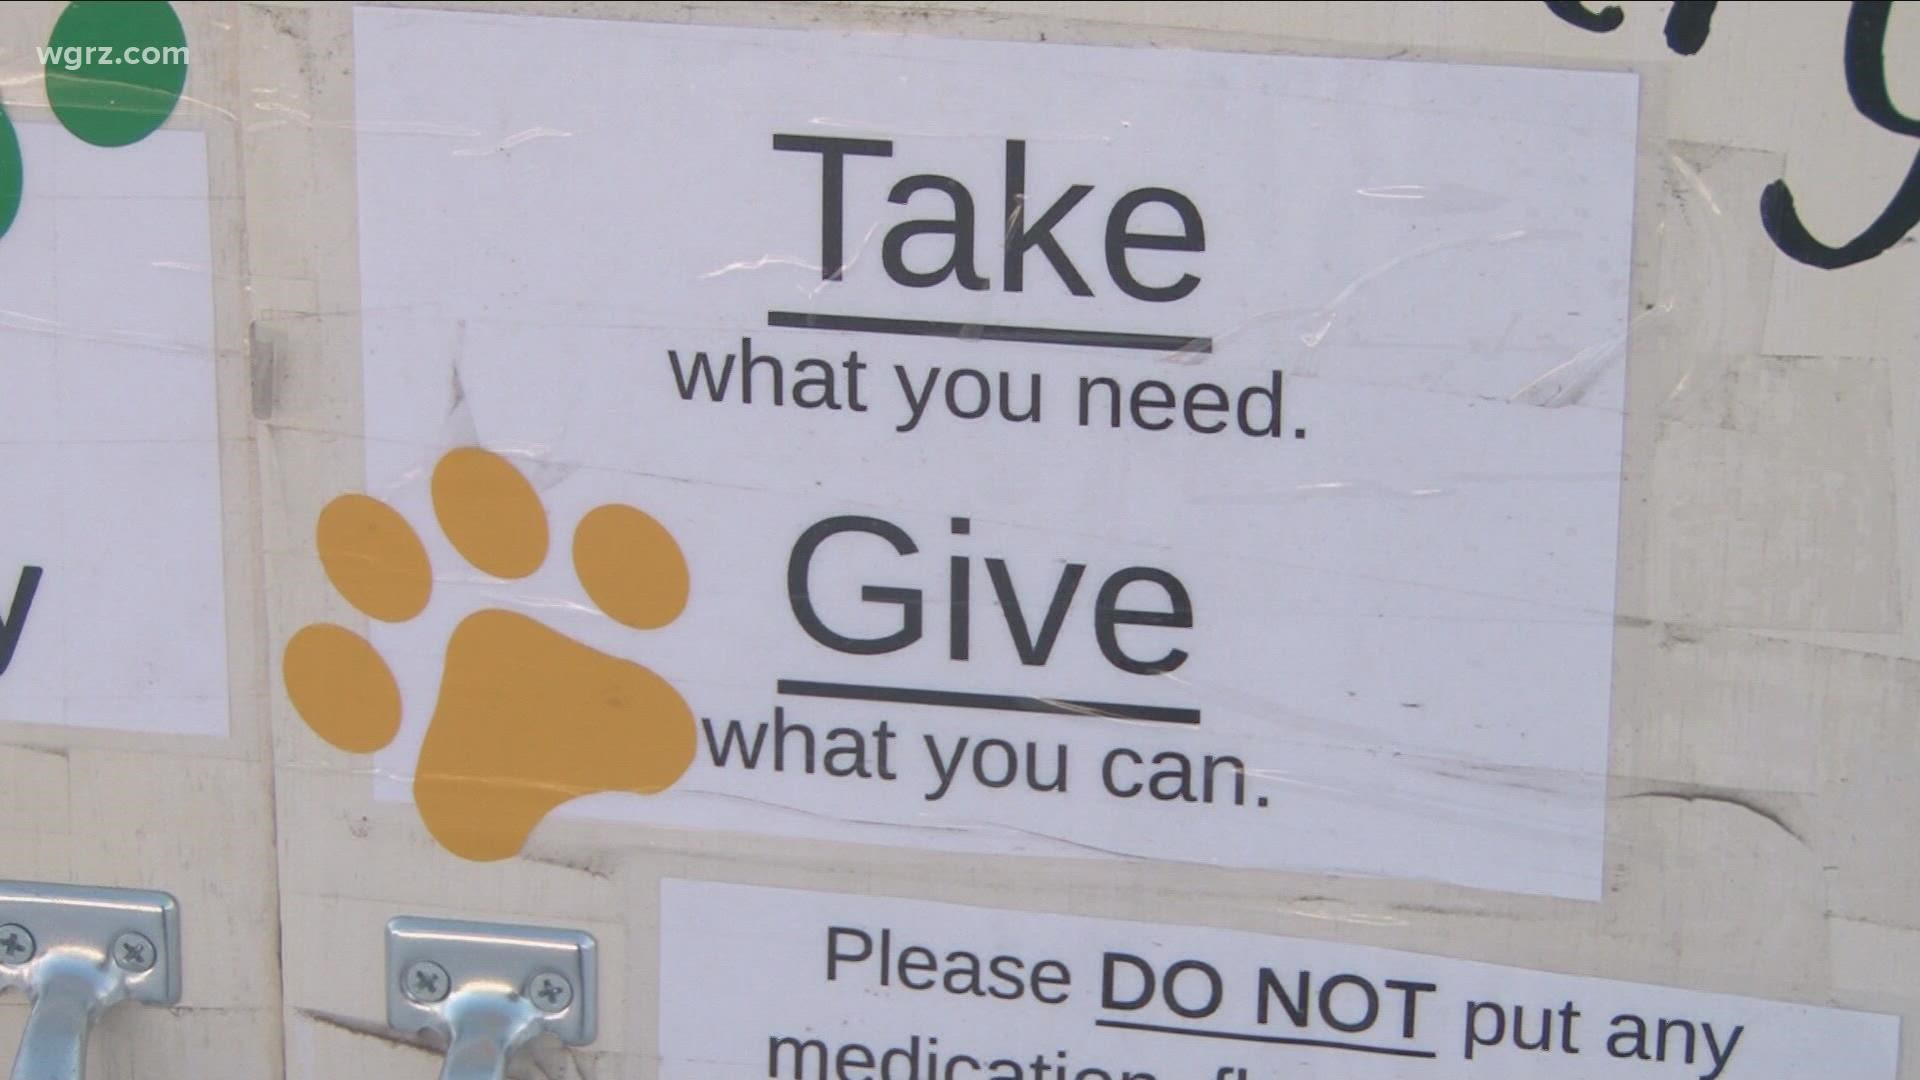 Jullianne Leslie wants struggling neighbors to use her Little Free Pet Pantry so they don't have to choose between feeding their pets and feeding themselves.